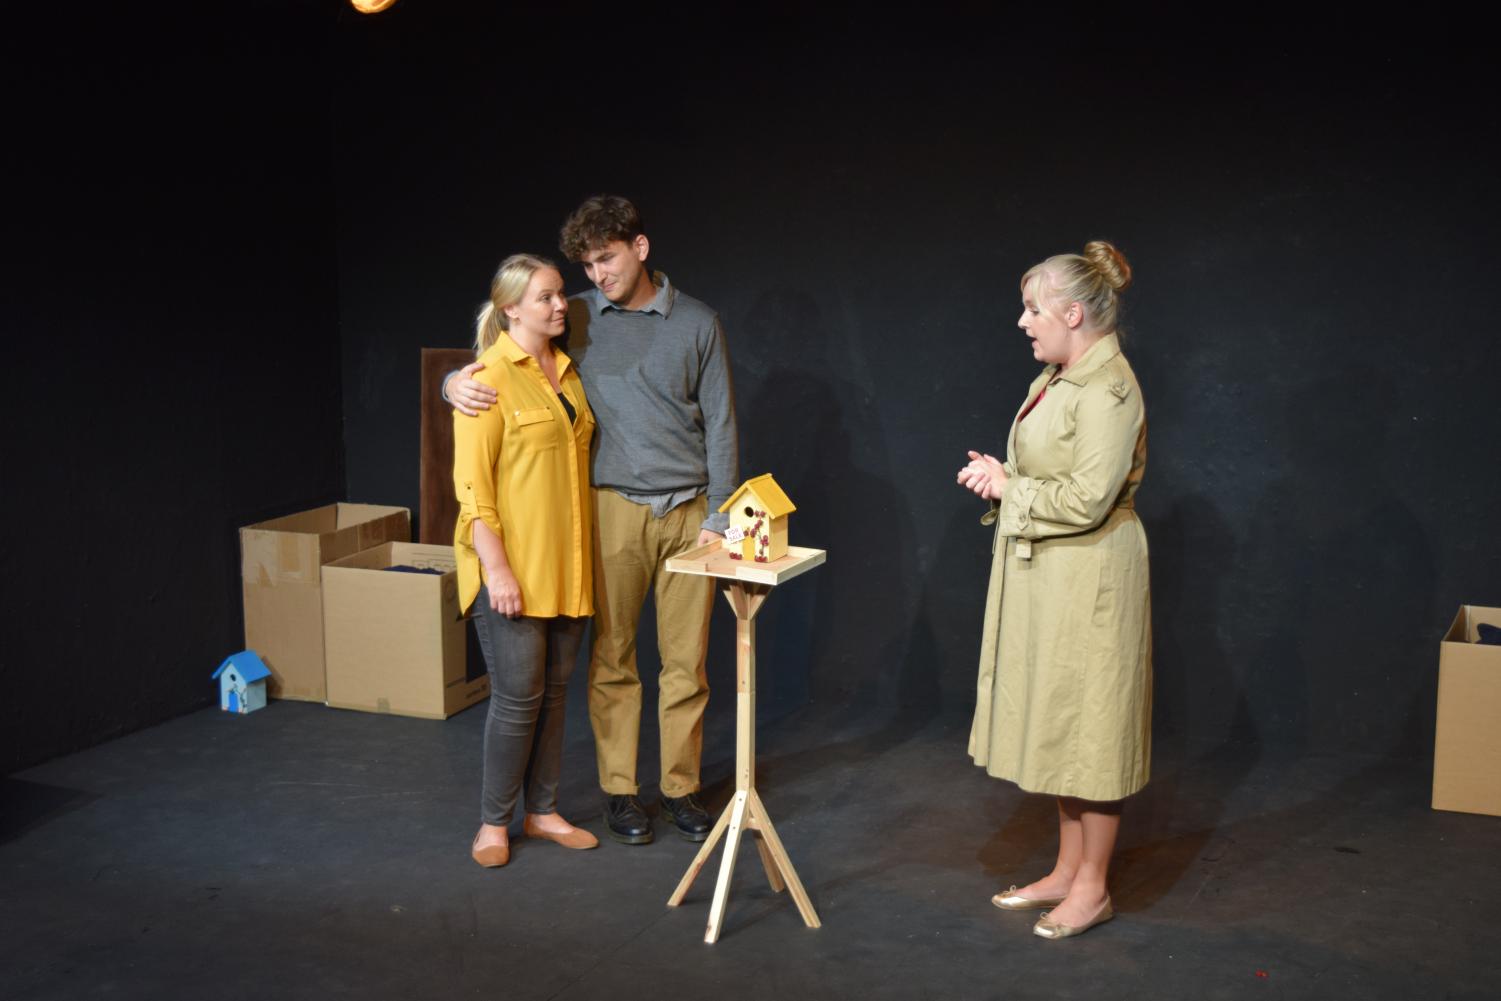 The+cast+of+The+Squirrel+Play+perform+at+the+Edinburgh+Festival+Fringe.+The+play+is+part+of+a+two-part+performance.+